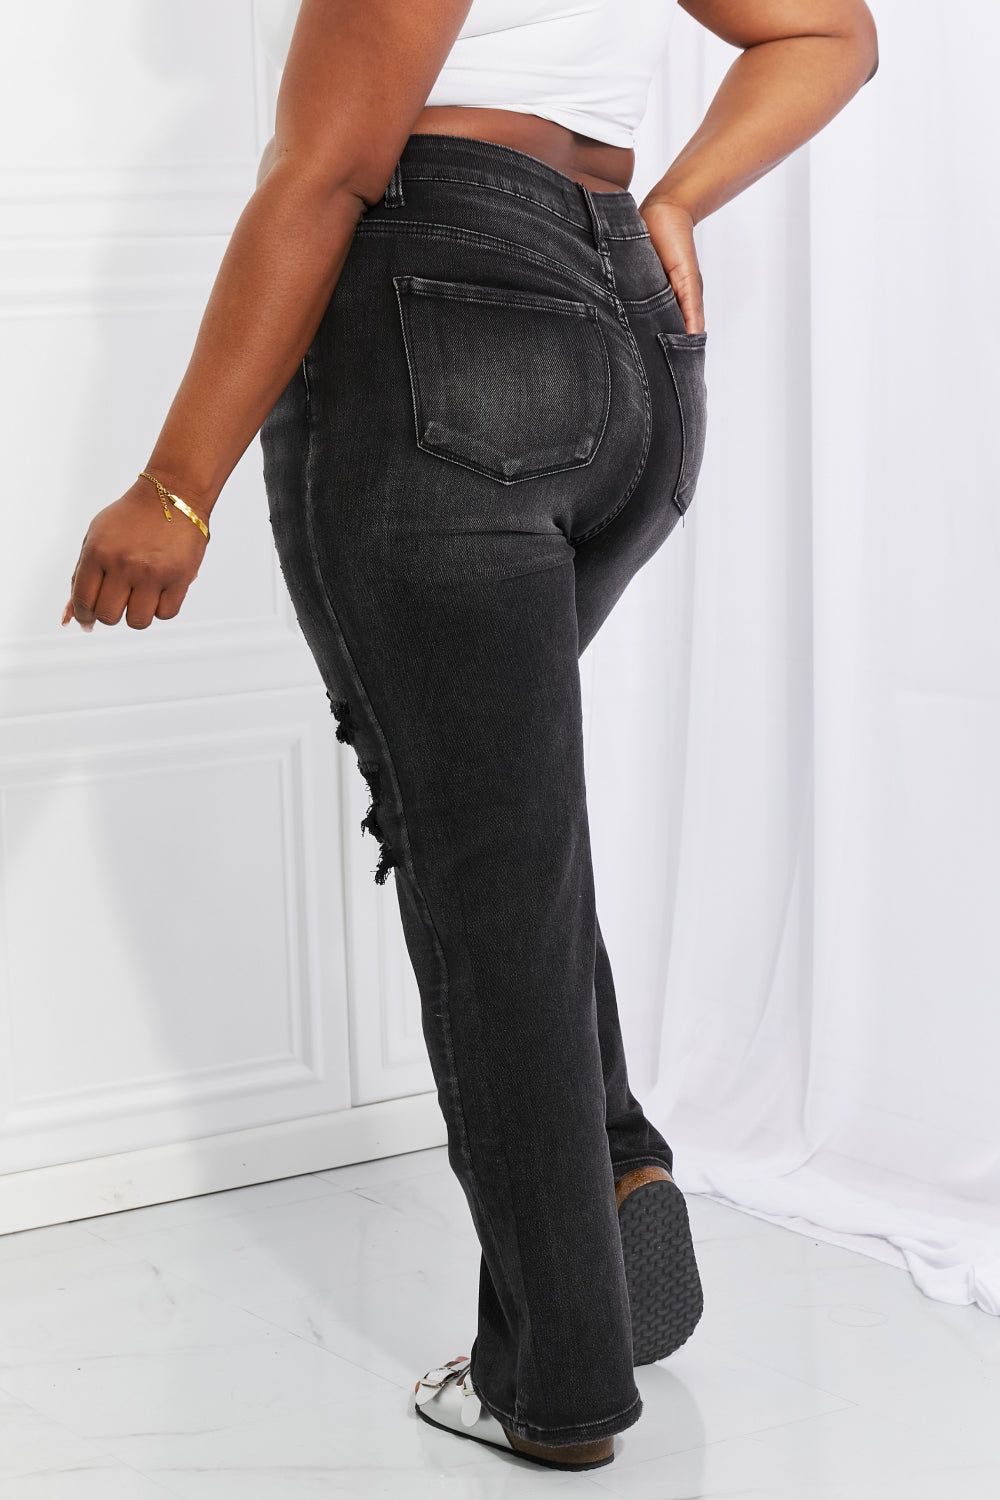 RISEN | Full Size Lois Distressed Loose Fit Jeans - us.meeeshop